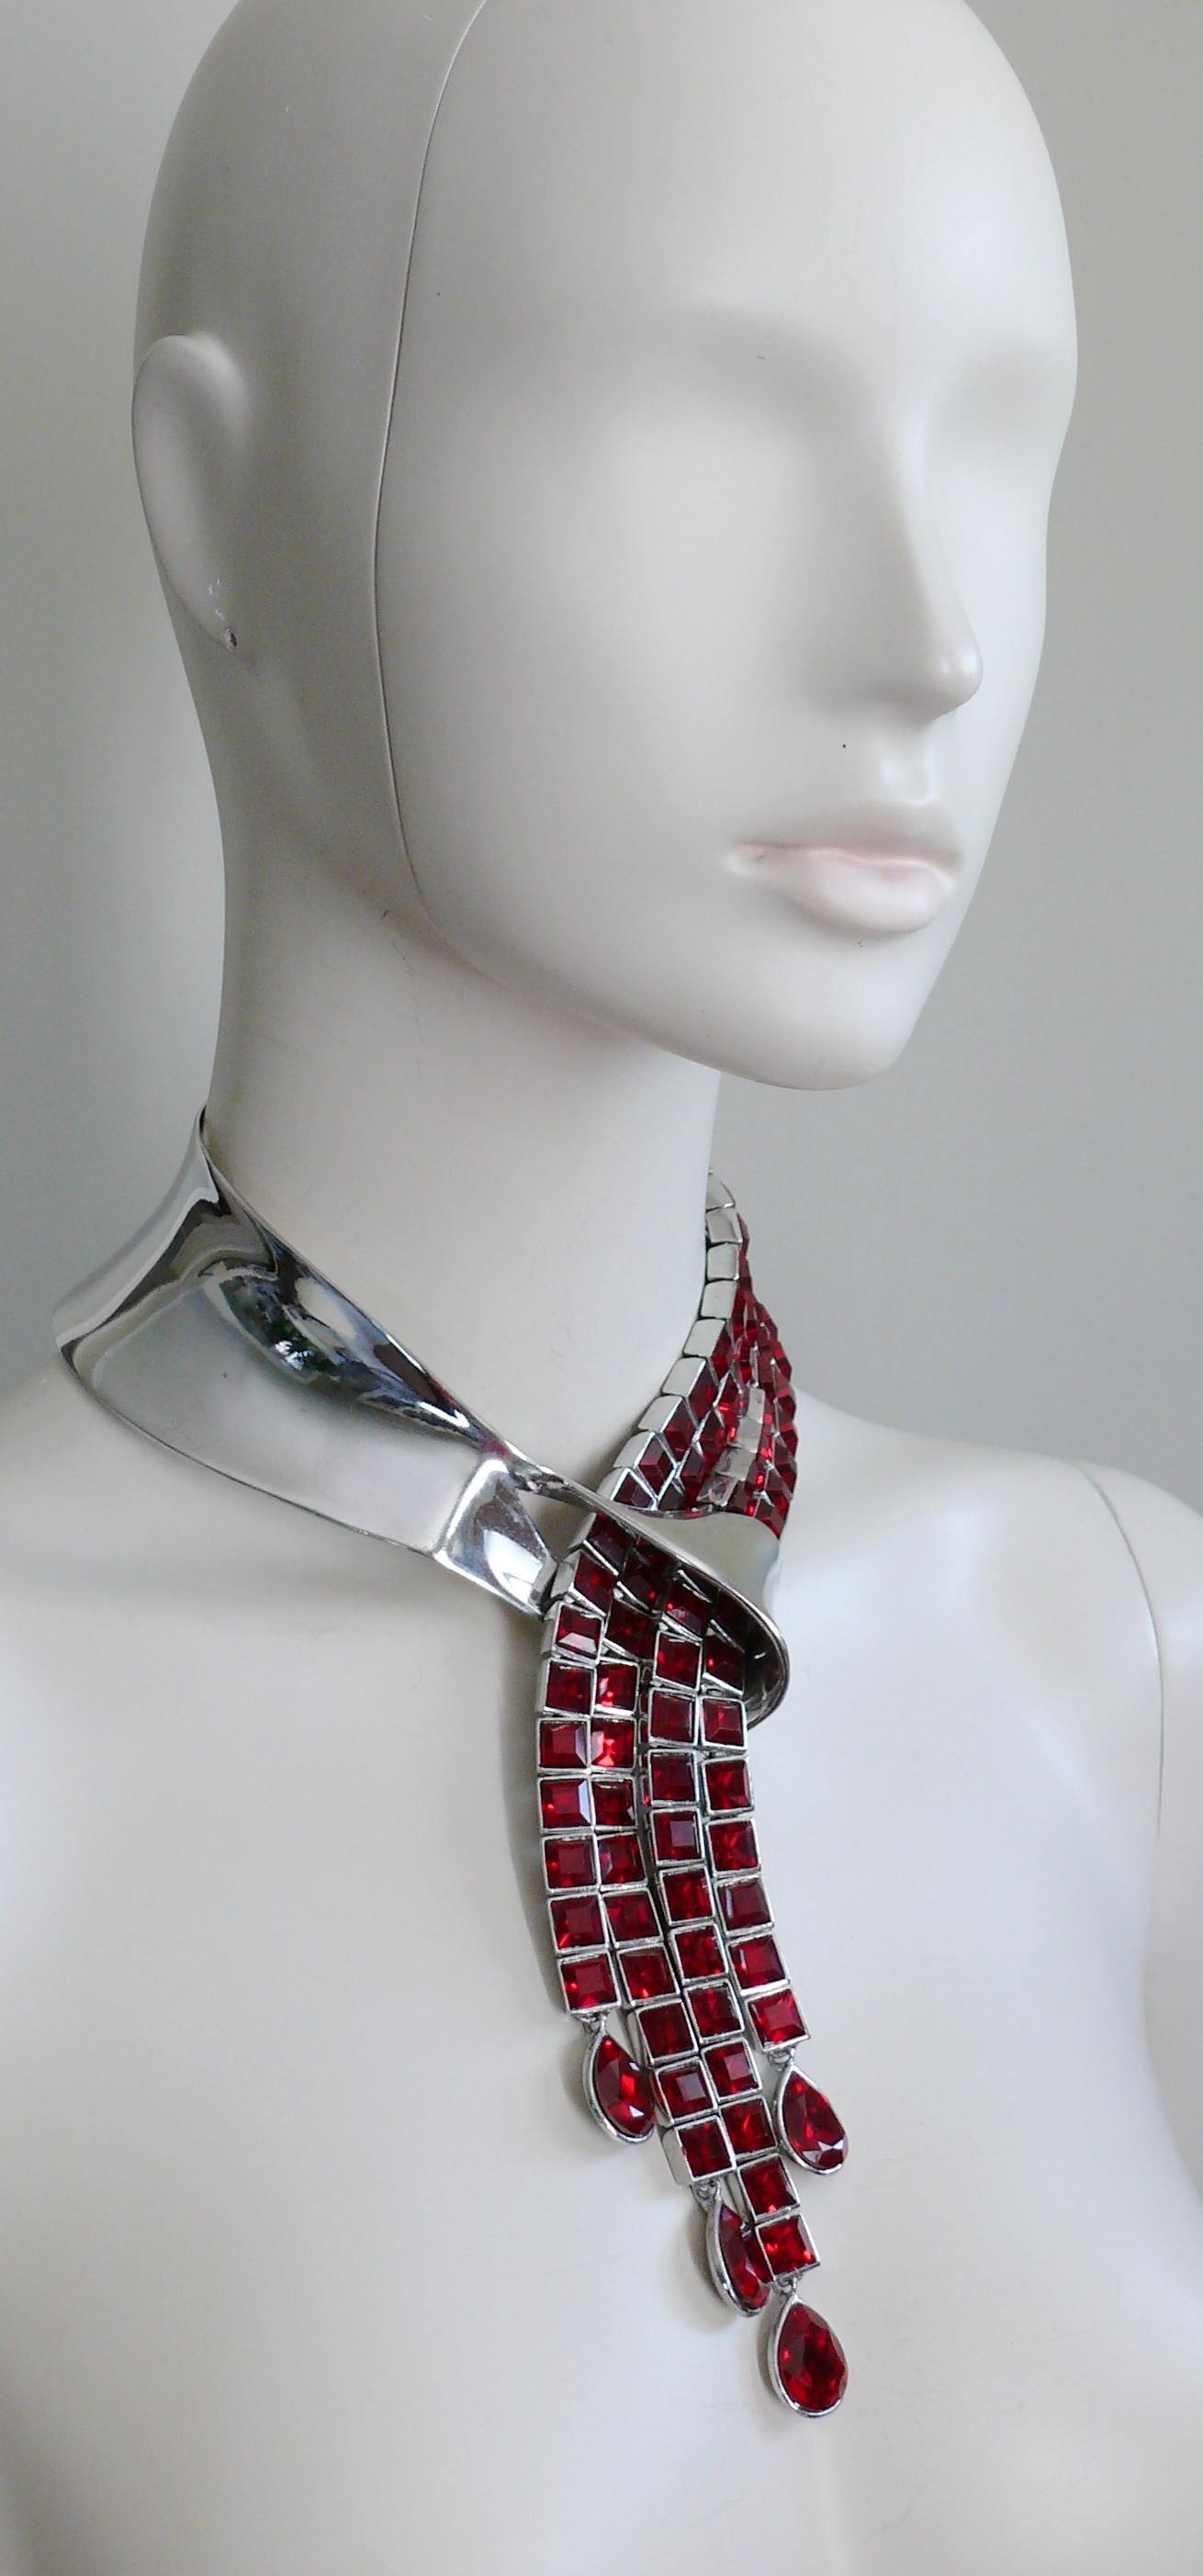 THIERRY MUGLER vintage rare and fabulous space age polished silver toned chocker necklace featuring four articulated strands of large square ruby crystals chains finishing with ruby crystal drops.

Silver tone metal hardware.

No clasp system. The